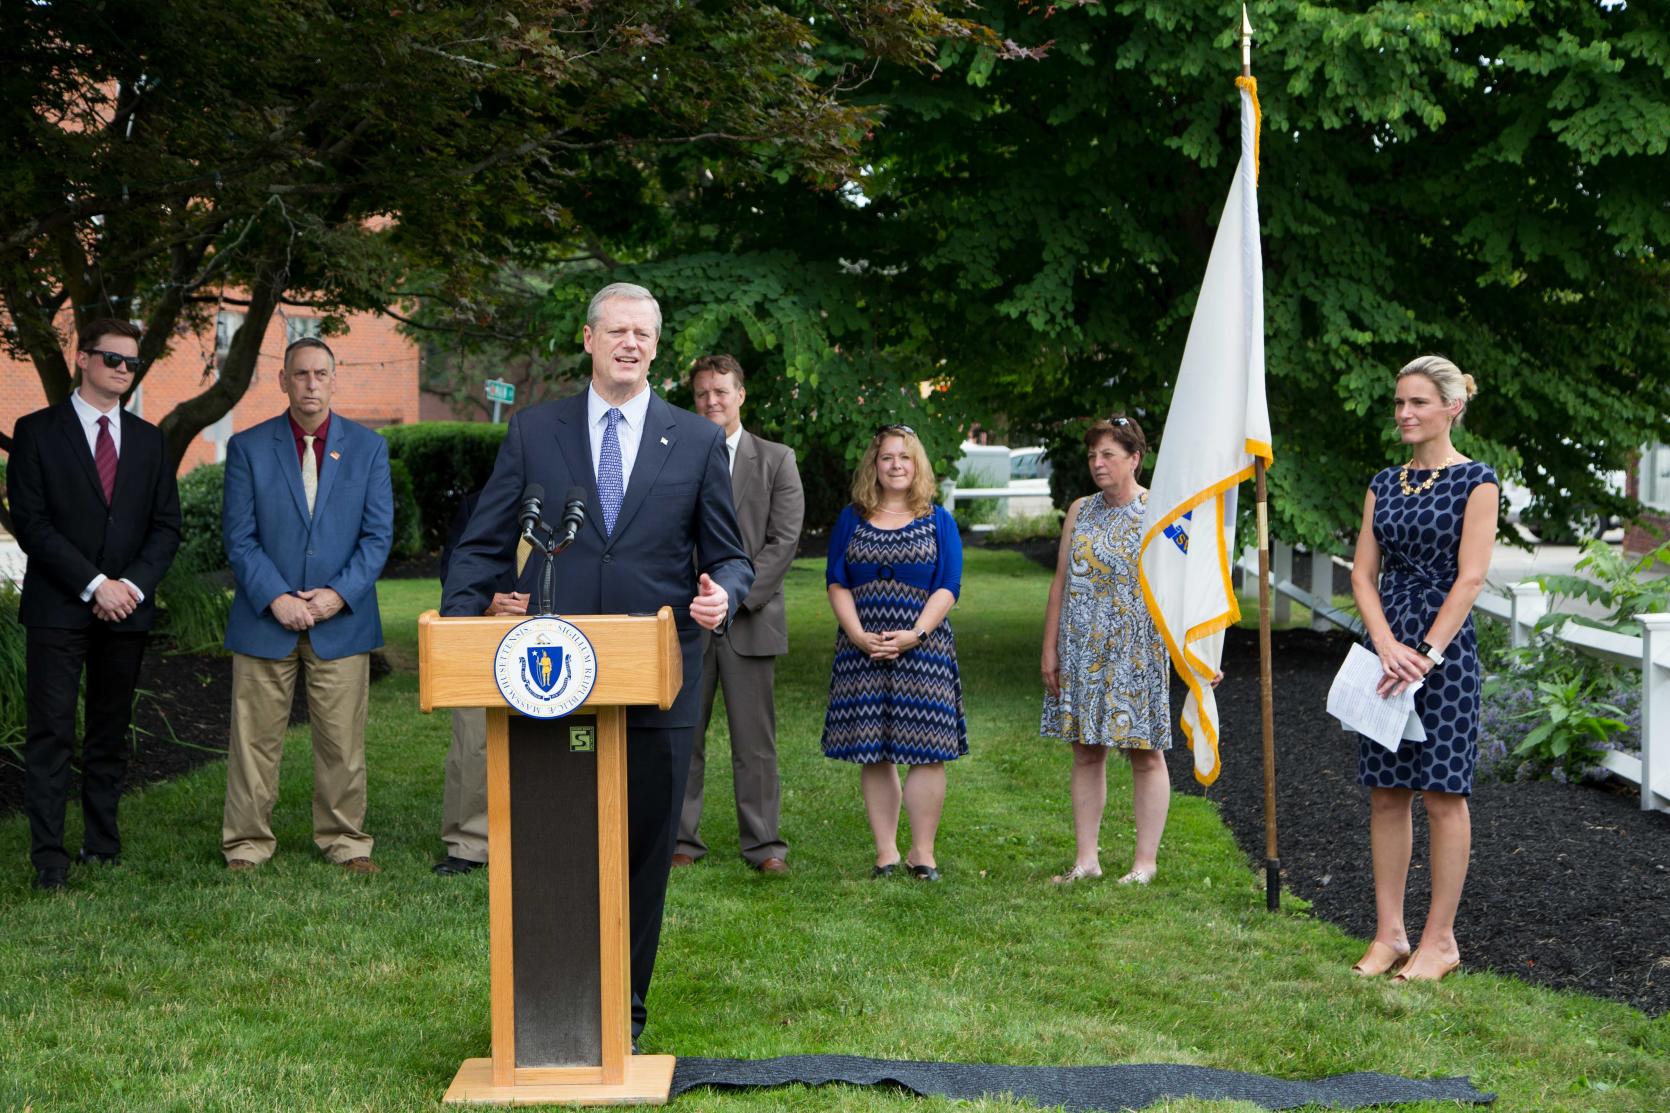 PHOTO RELEASE: Baker-Polito Administration Awards $1 Million to Town of Millbury to Address Climate Change Impacts